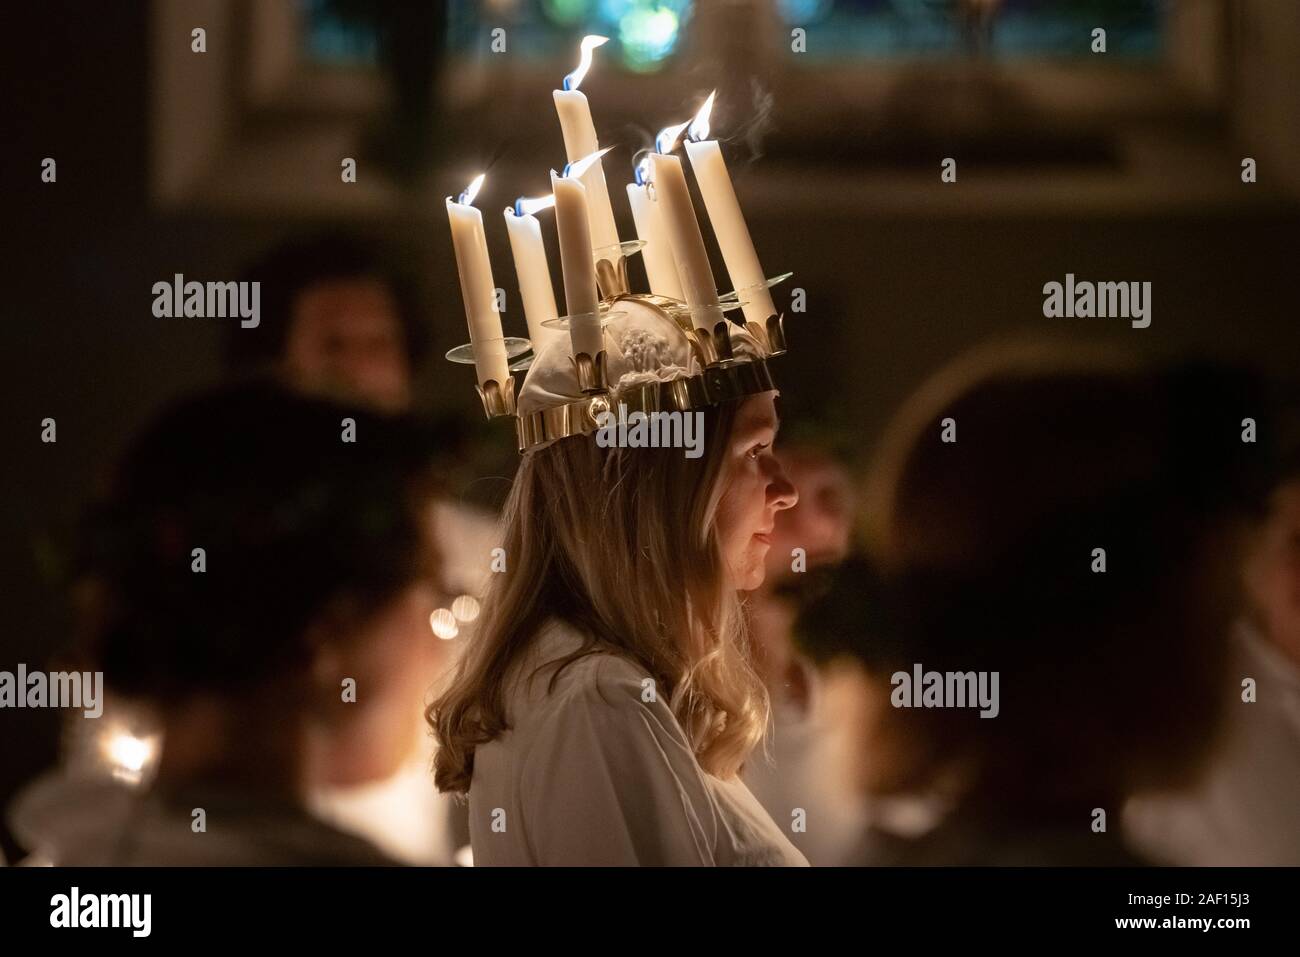 London, UK. 11th December, 2019. Liv Palmblad, from Sweden, playing the role of Lucia, leads the procession during the London Nordic Choir’s traditional Scandinavian ‘Sankta Lucia’ concert at St John’s Church near Hyde Park. The service features a candlelit procession of choristers led by a girl, Lucia, wearing a crown of candles and a red sash around her waist. Credit: Guy Corbishley/Alamy Live News Stock Photo